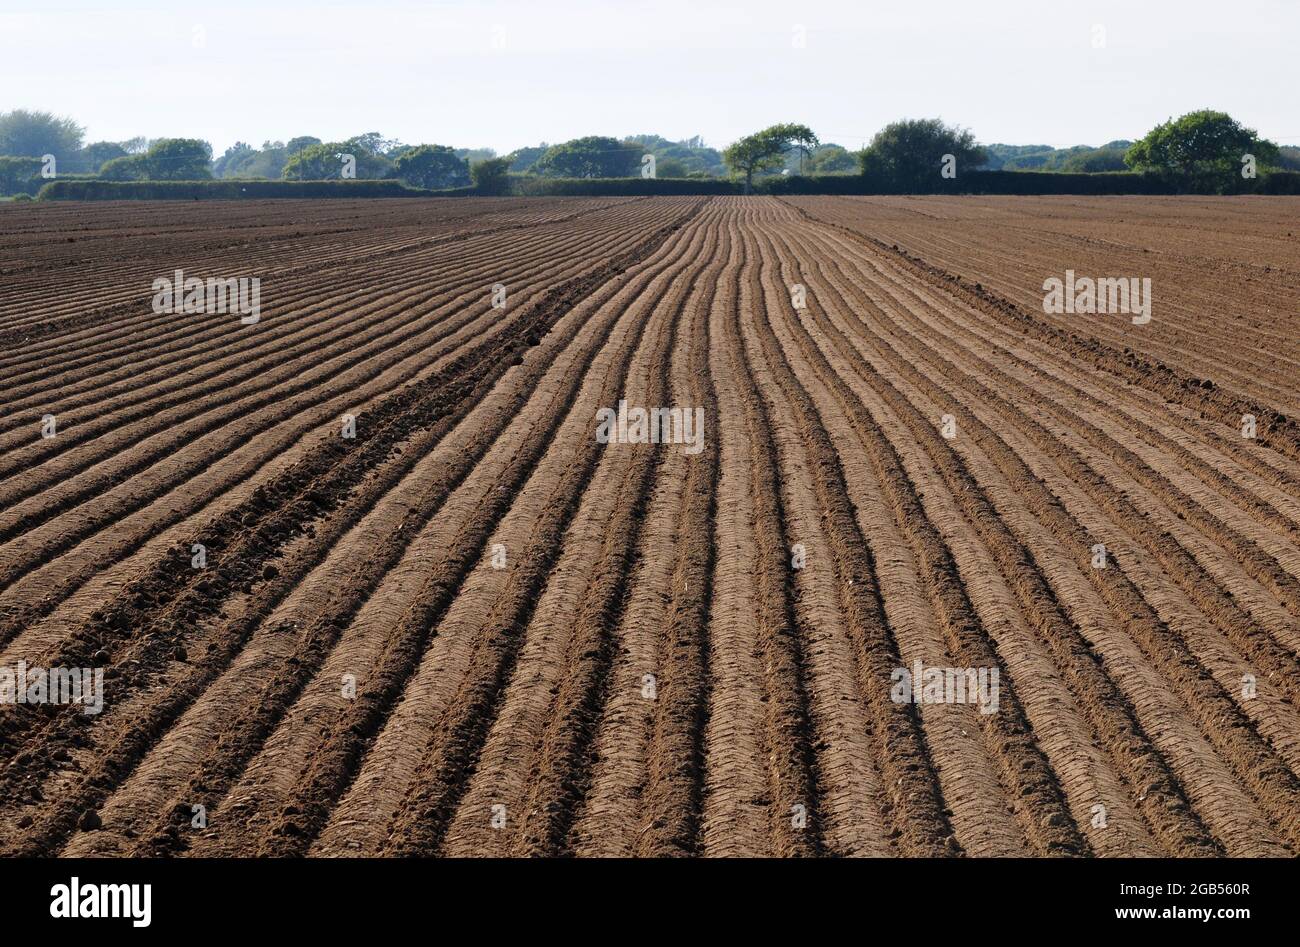 Soil prepared for planting maize. Stock Photo